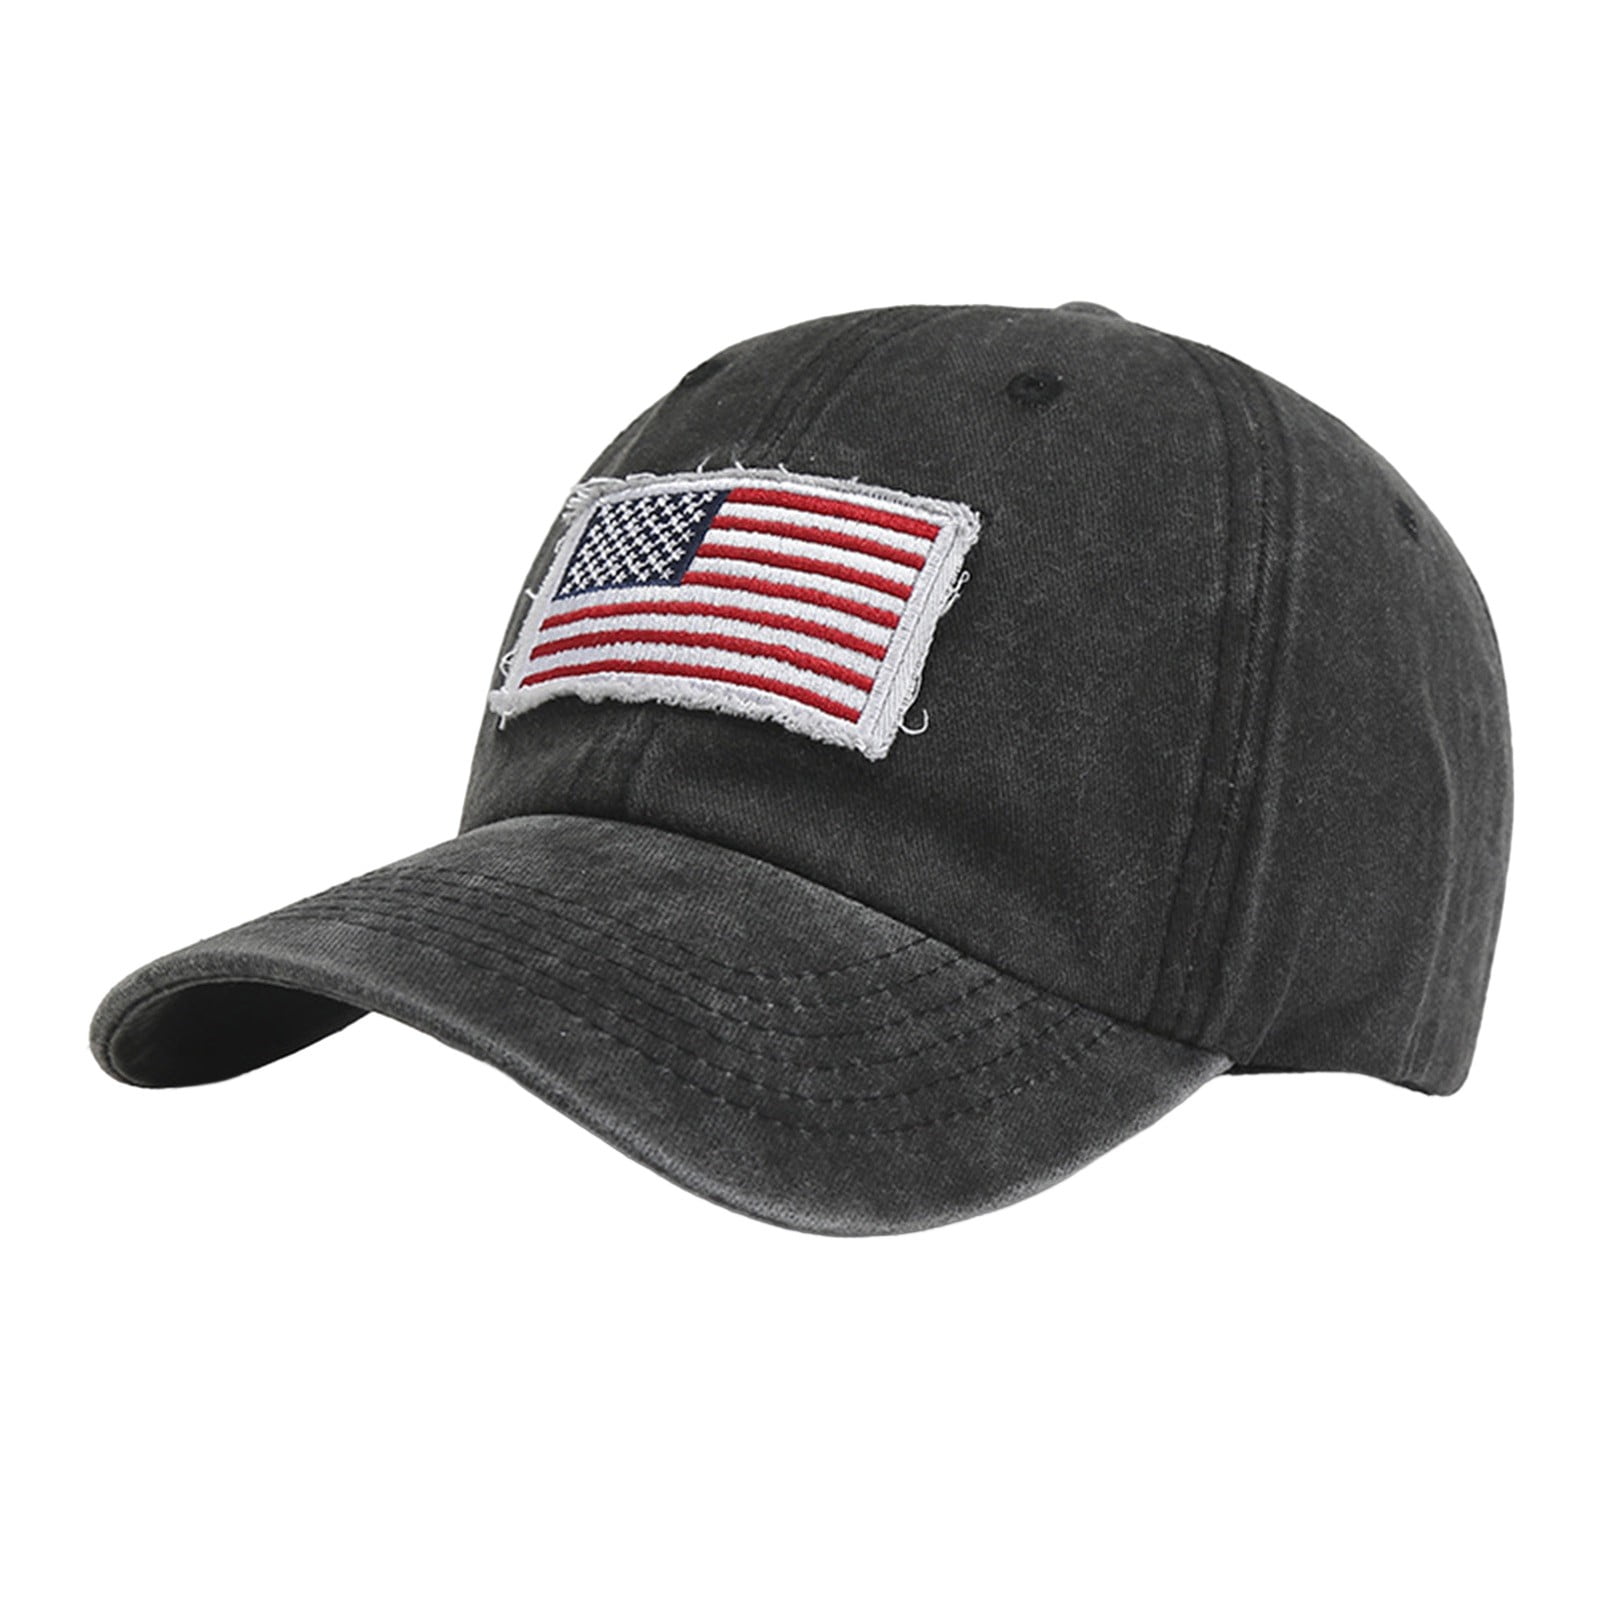 Stormdoing Vintage Baseball Hats for Men American Flag Patch Breathable Mesh Classic Baseball Caps Adjust Cotton Running Ball Hats, Adult Unisex, Size